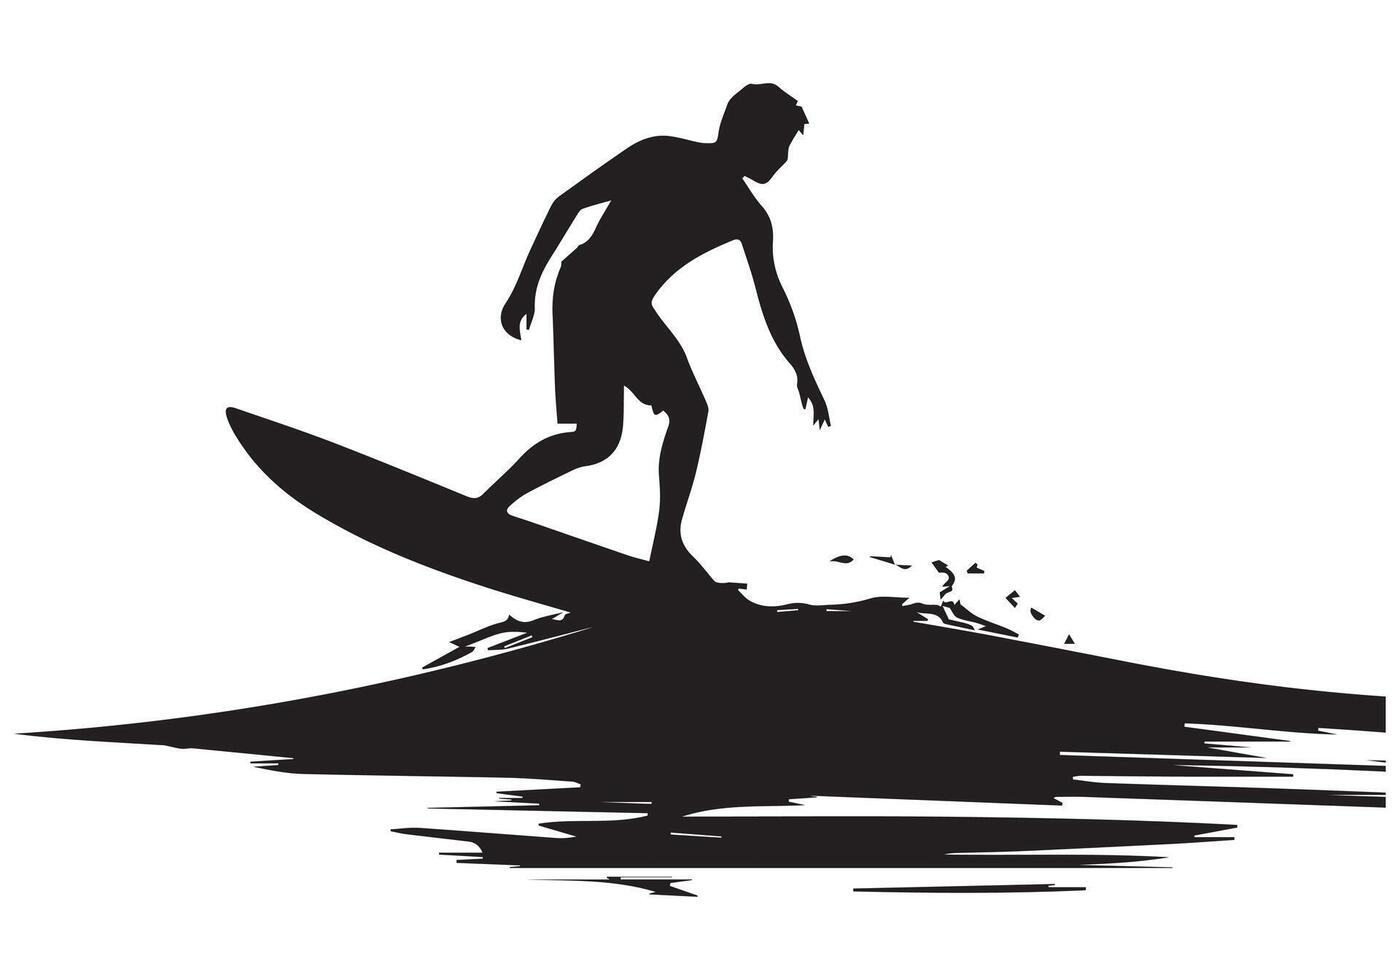 Surfboarding silhouettes free design vector